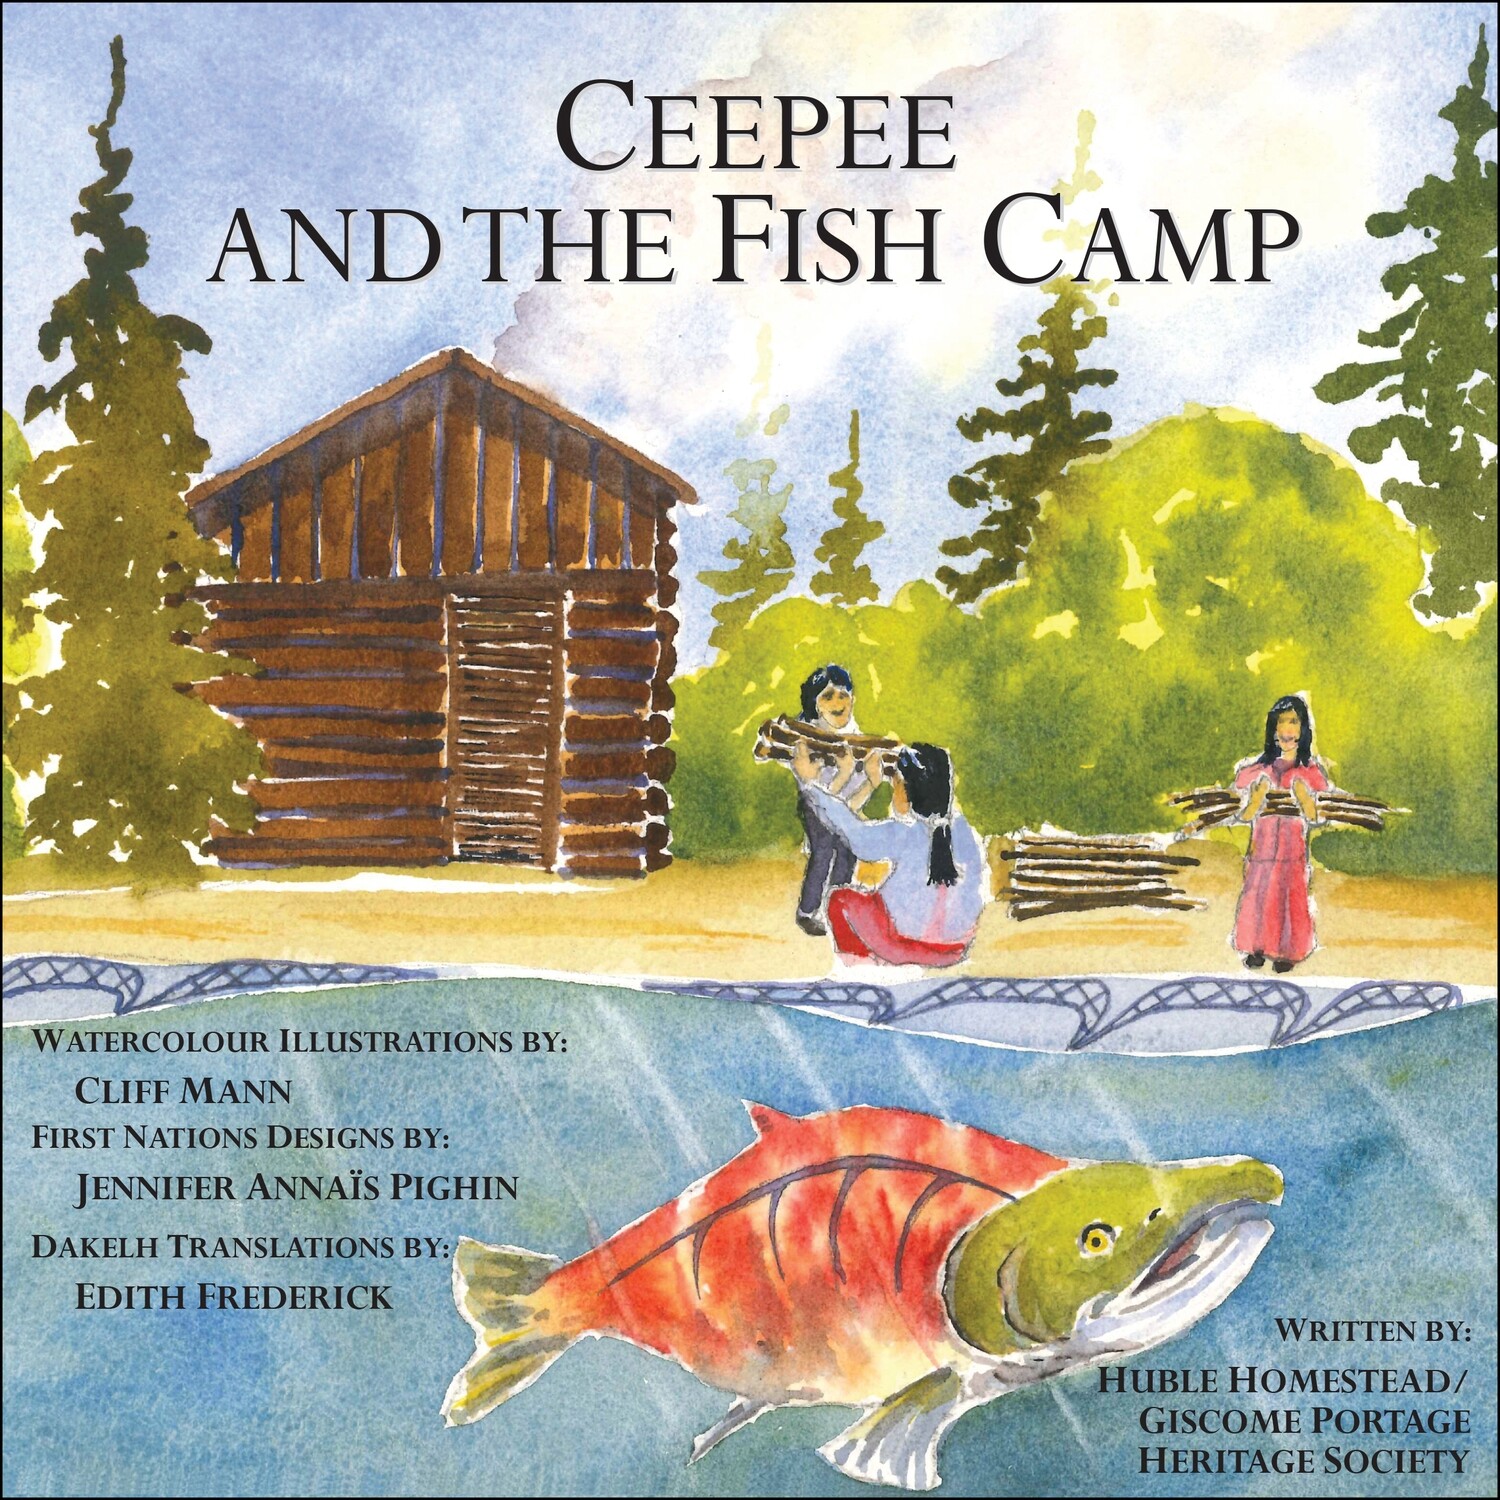 Ceepee and the Fish Camp